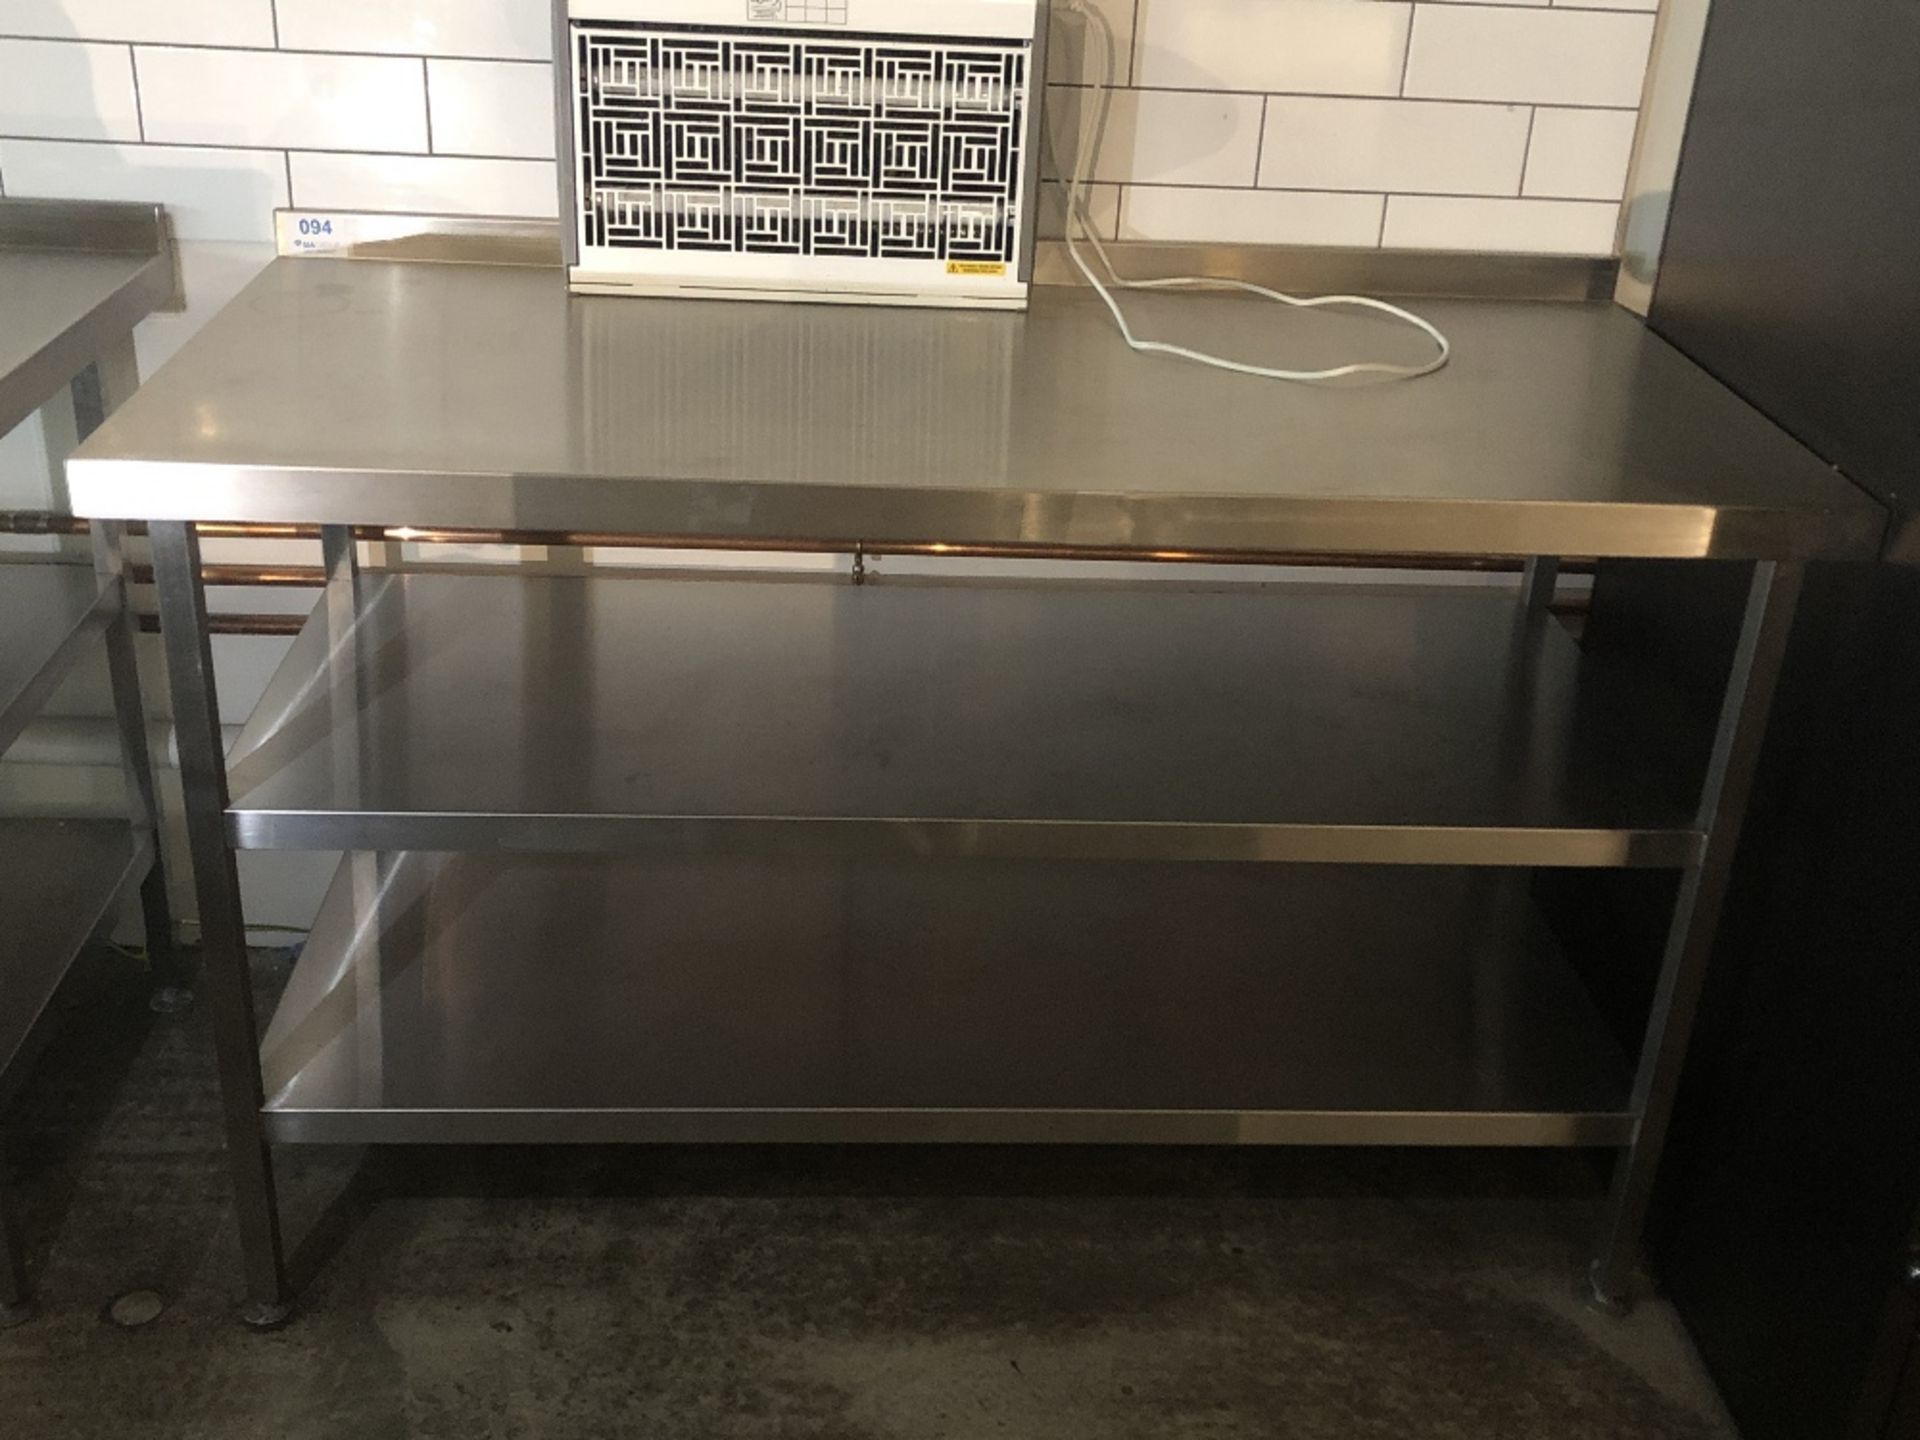 Rectangular Three Tier Stainless Steel Preparation Table - Image 2 of 3